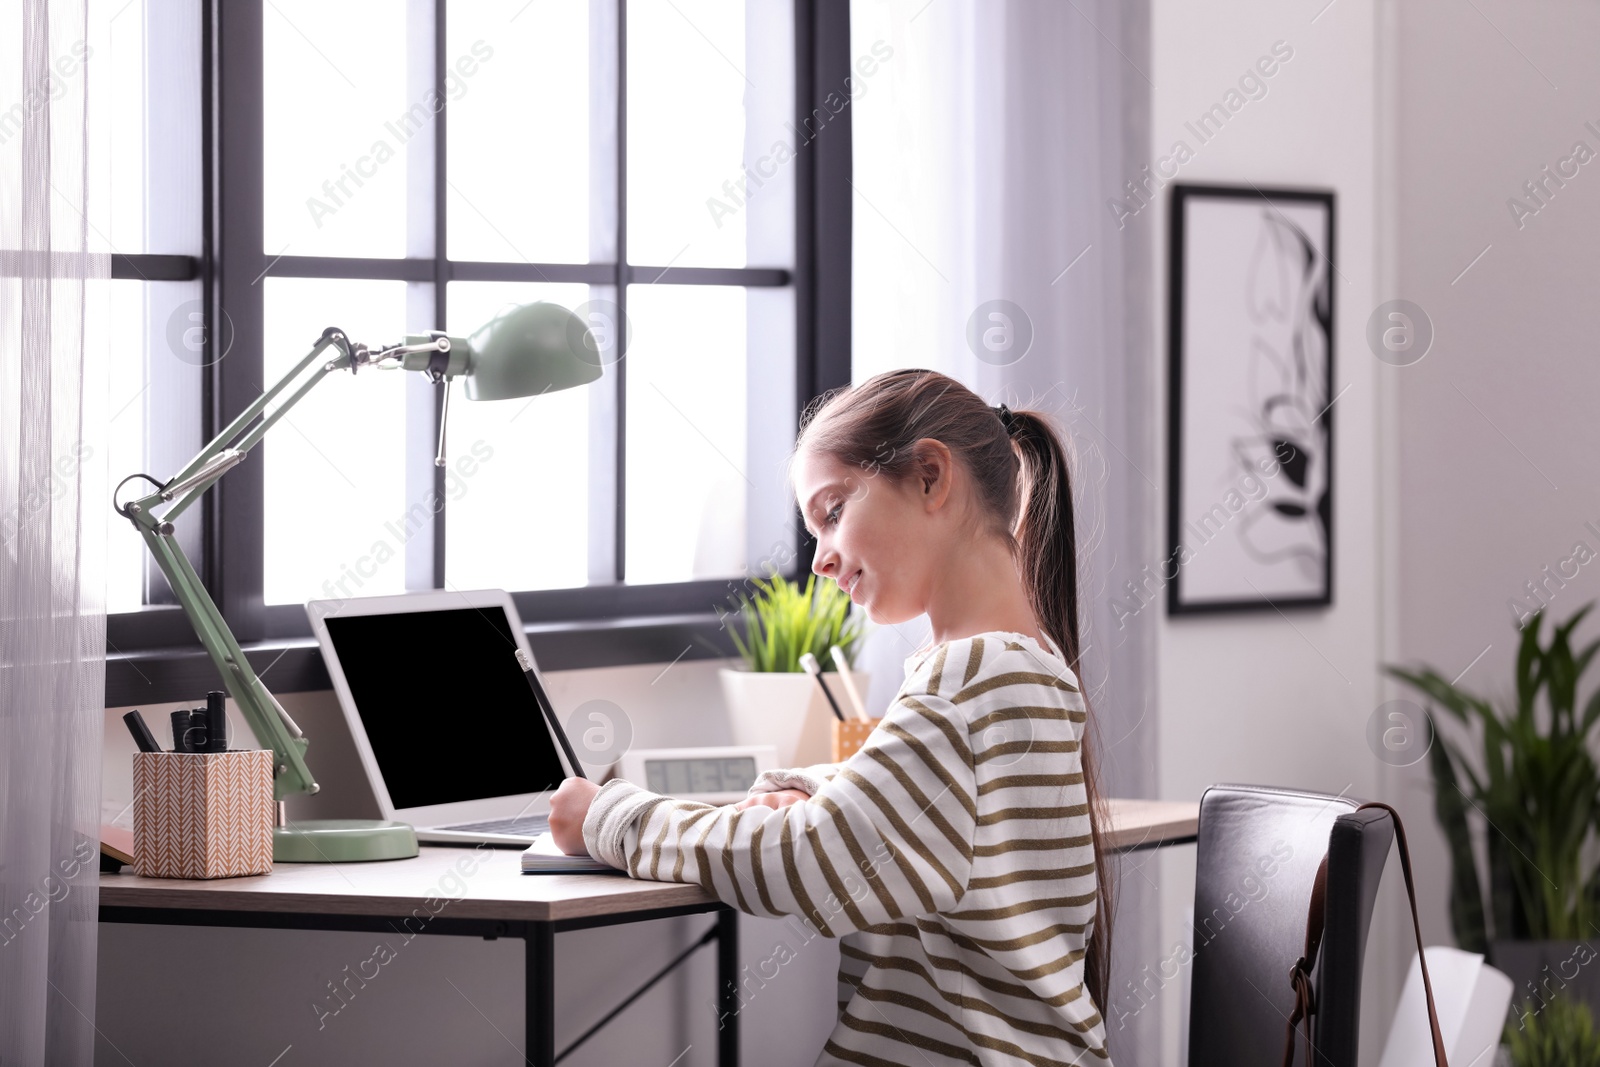 Photo of Pretty preteen girl doing homework at table in room